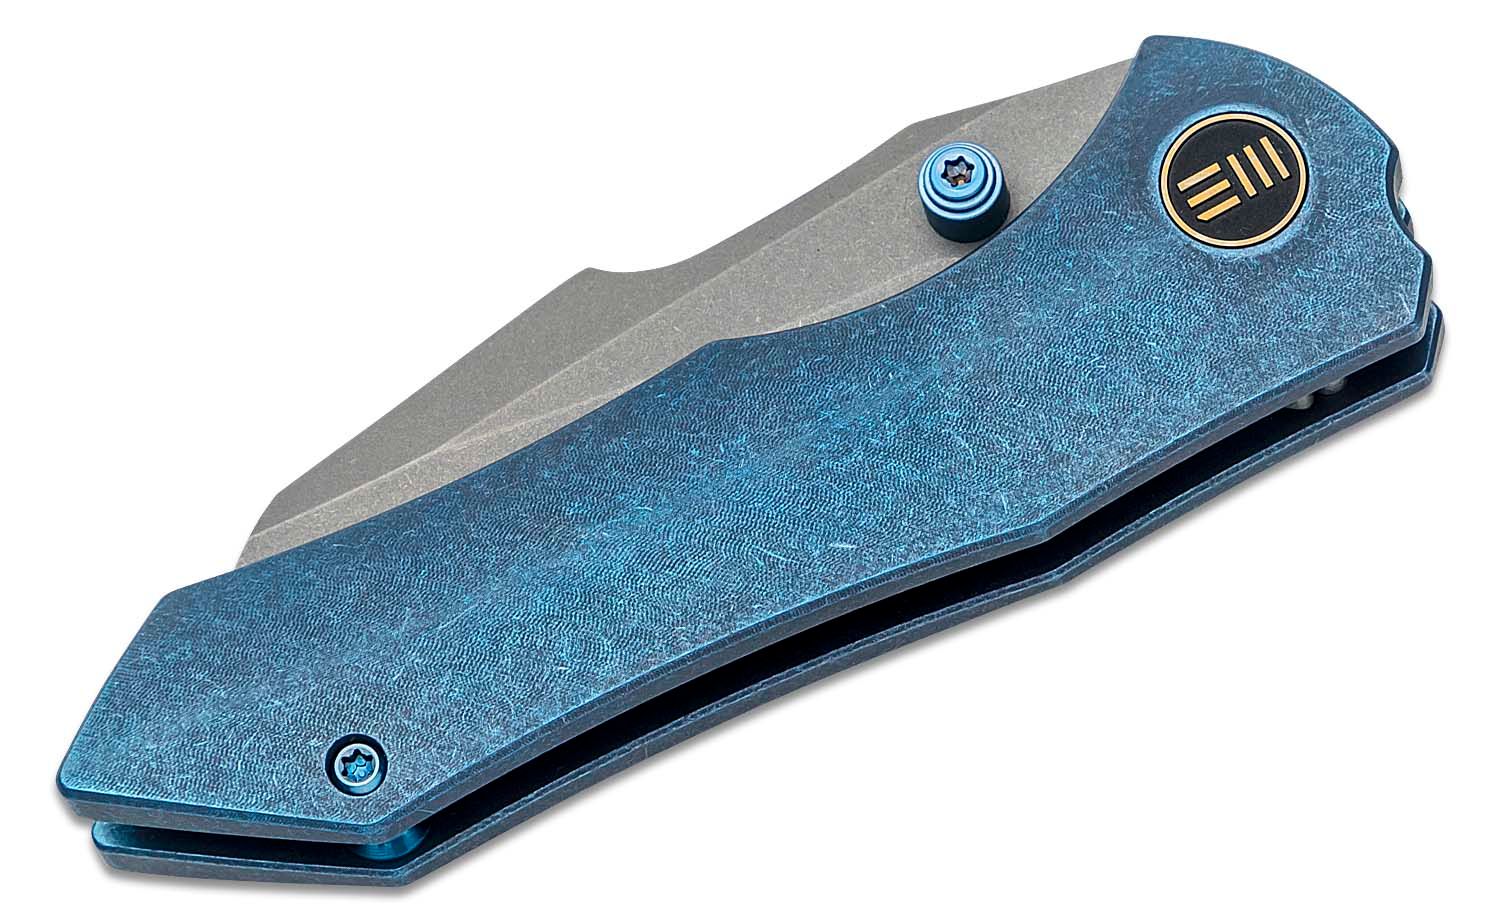 We Are True Blue Limited Edition Knife — We Are True Blue